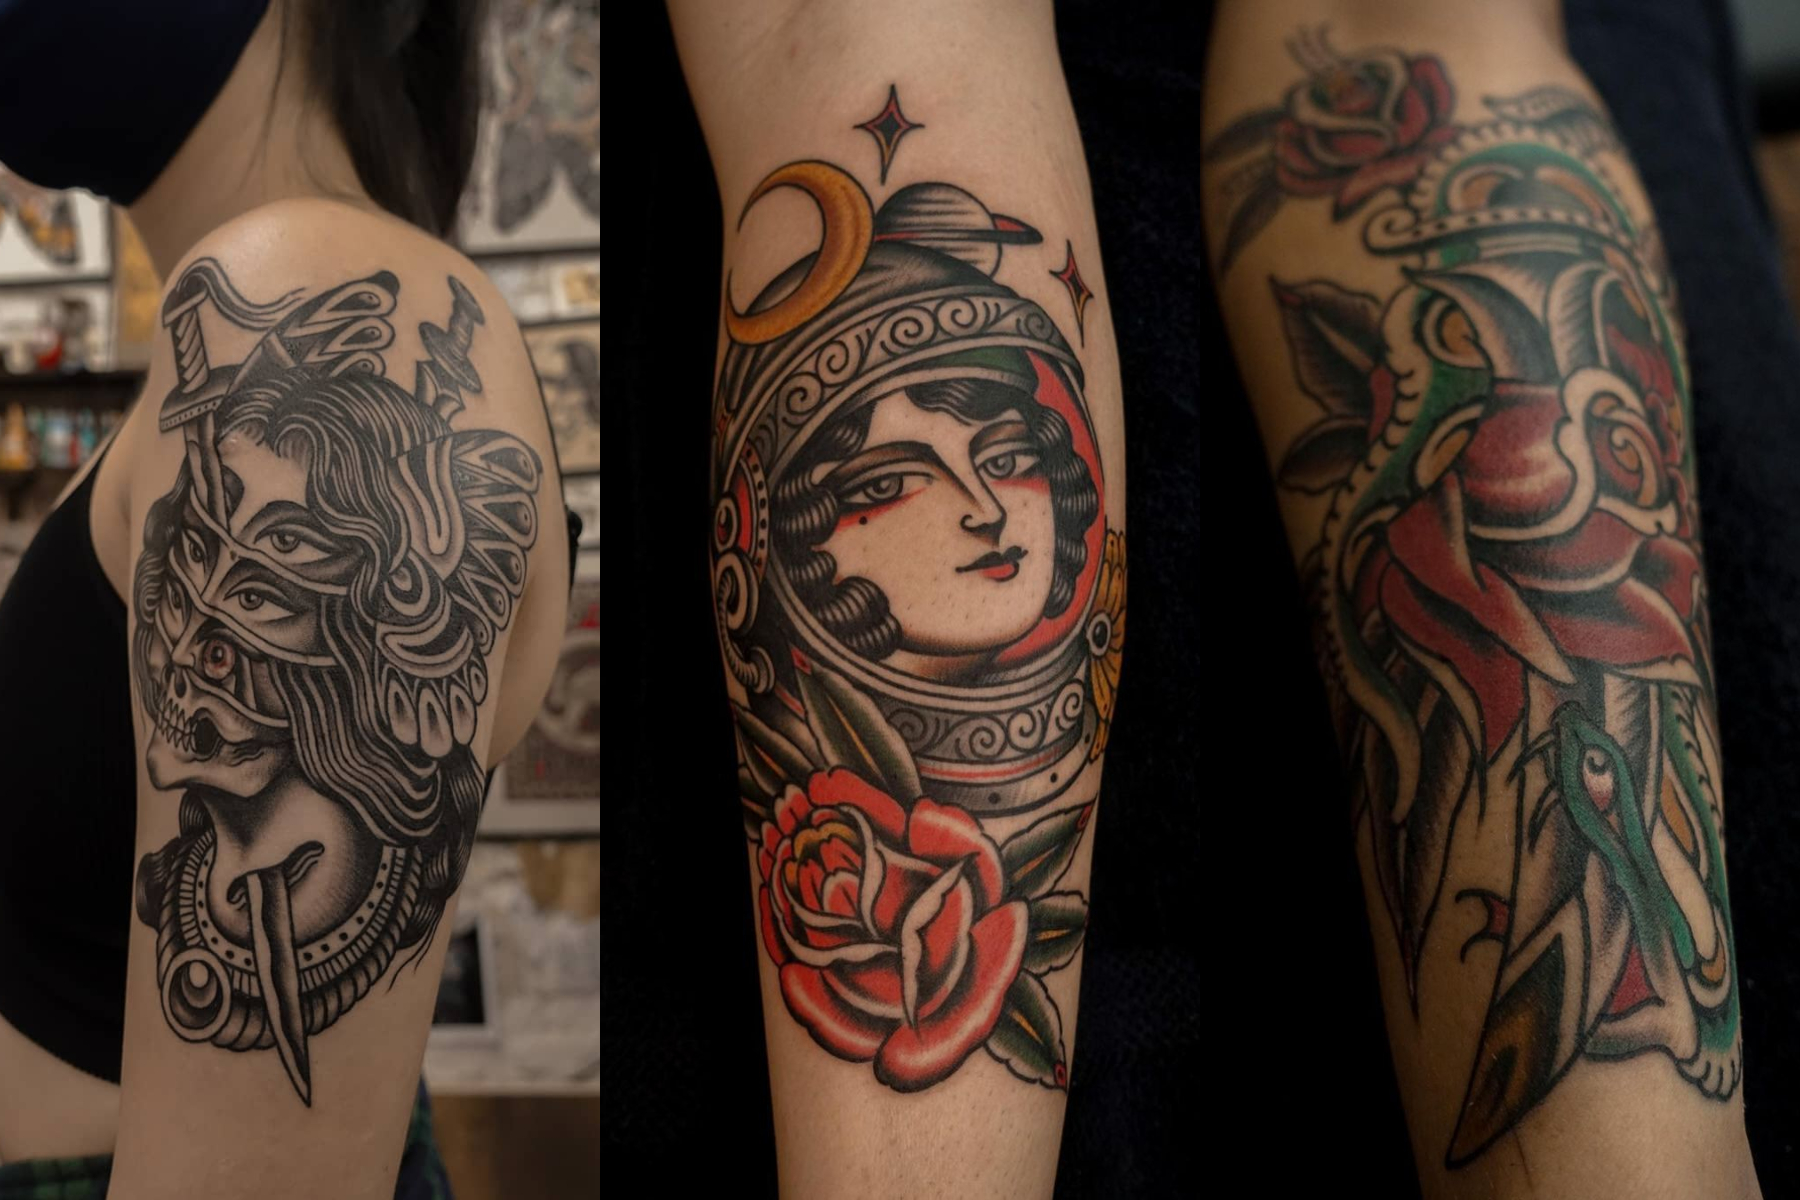 The Ink List: Getting to know 3 Malaysian tattoo artists